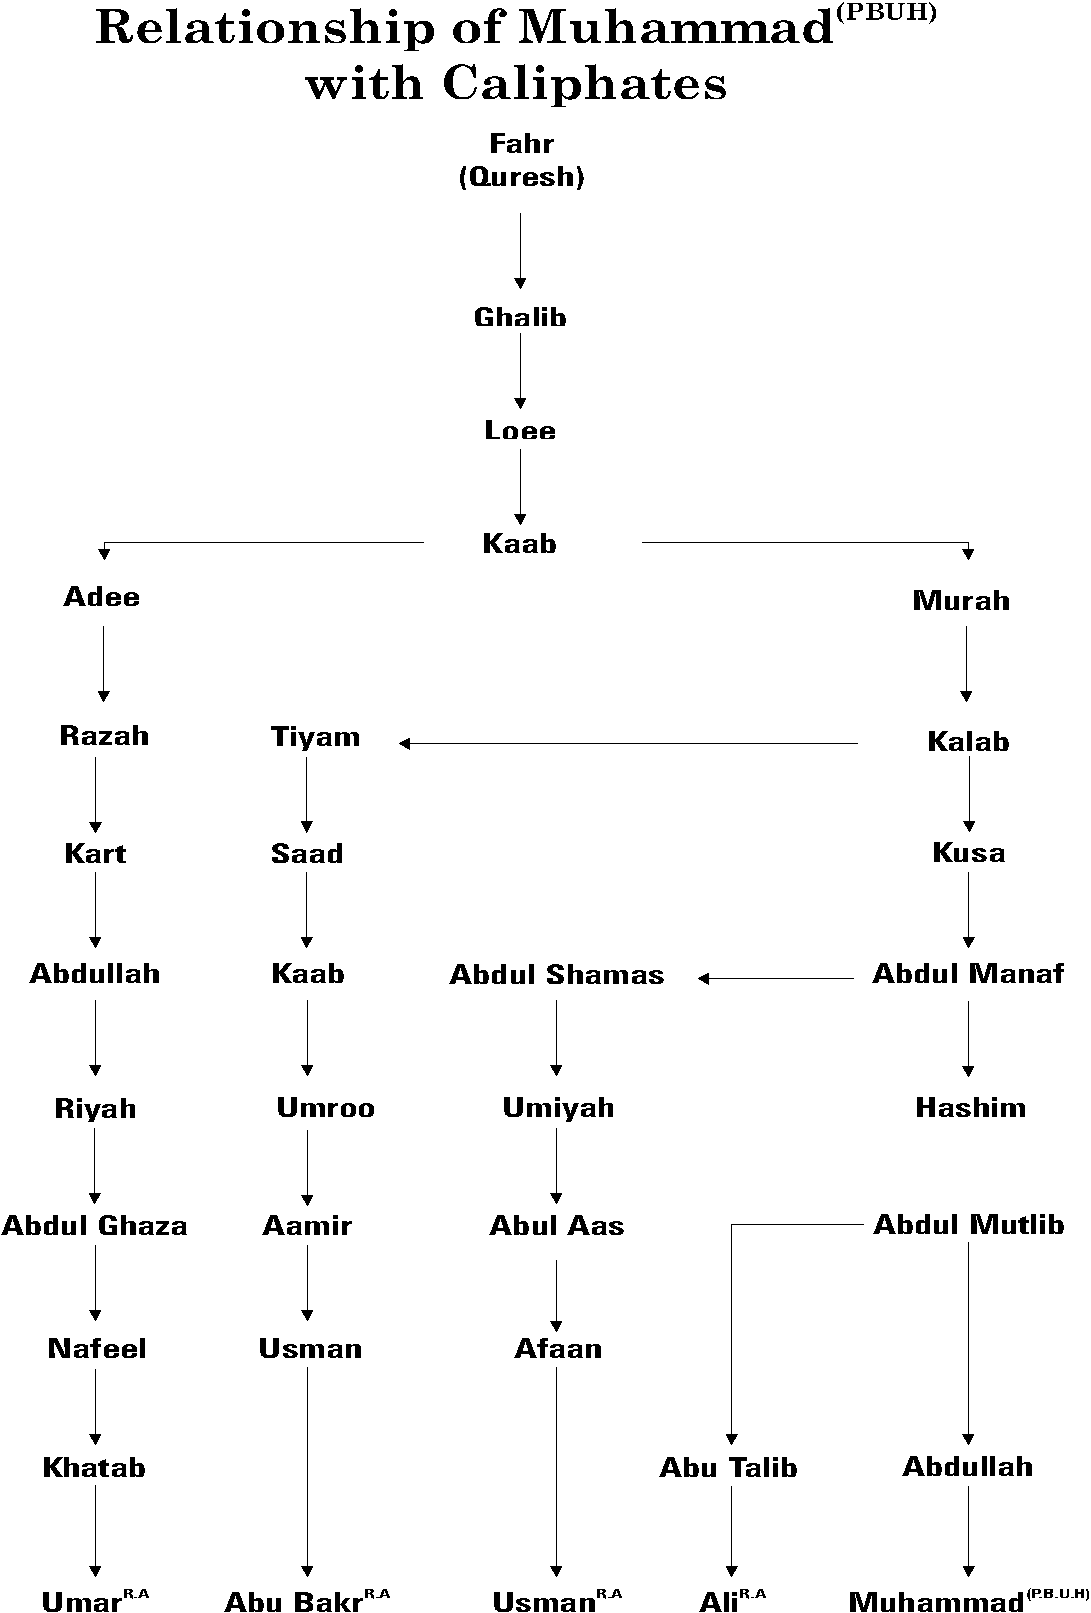 Relationship of Muhammad with Caliphates